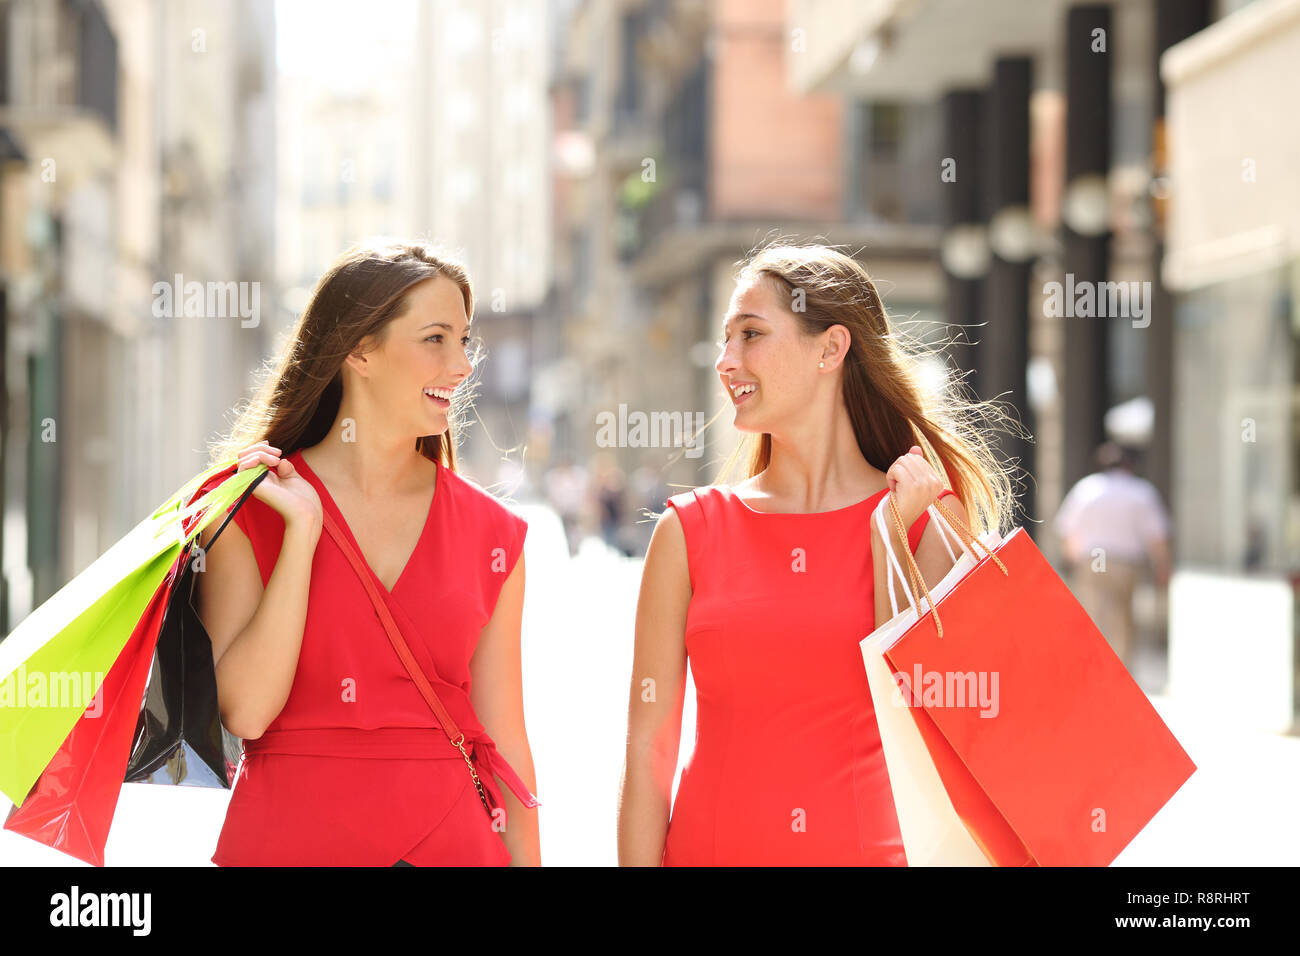 Front view portrait of two happy shoppers talking walking holding shopping bags in the street Stock Photo